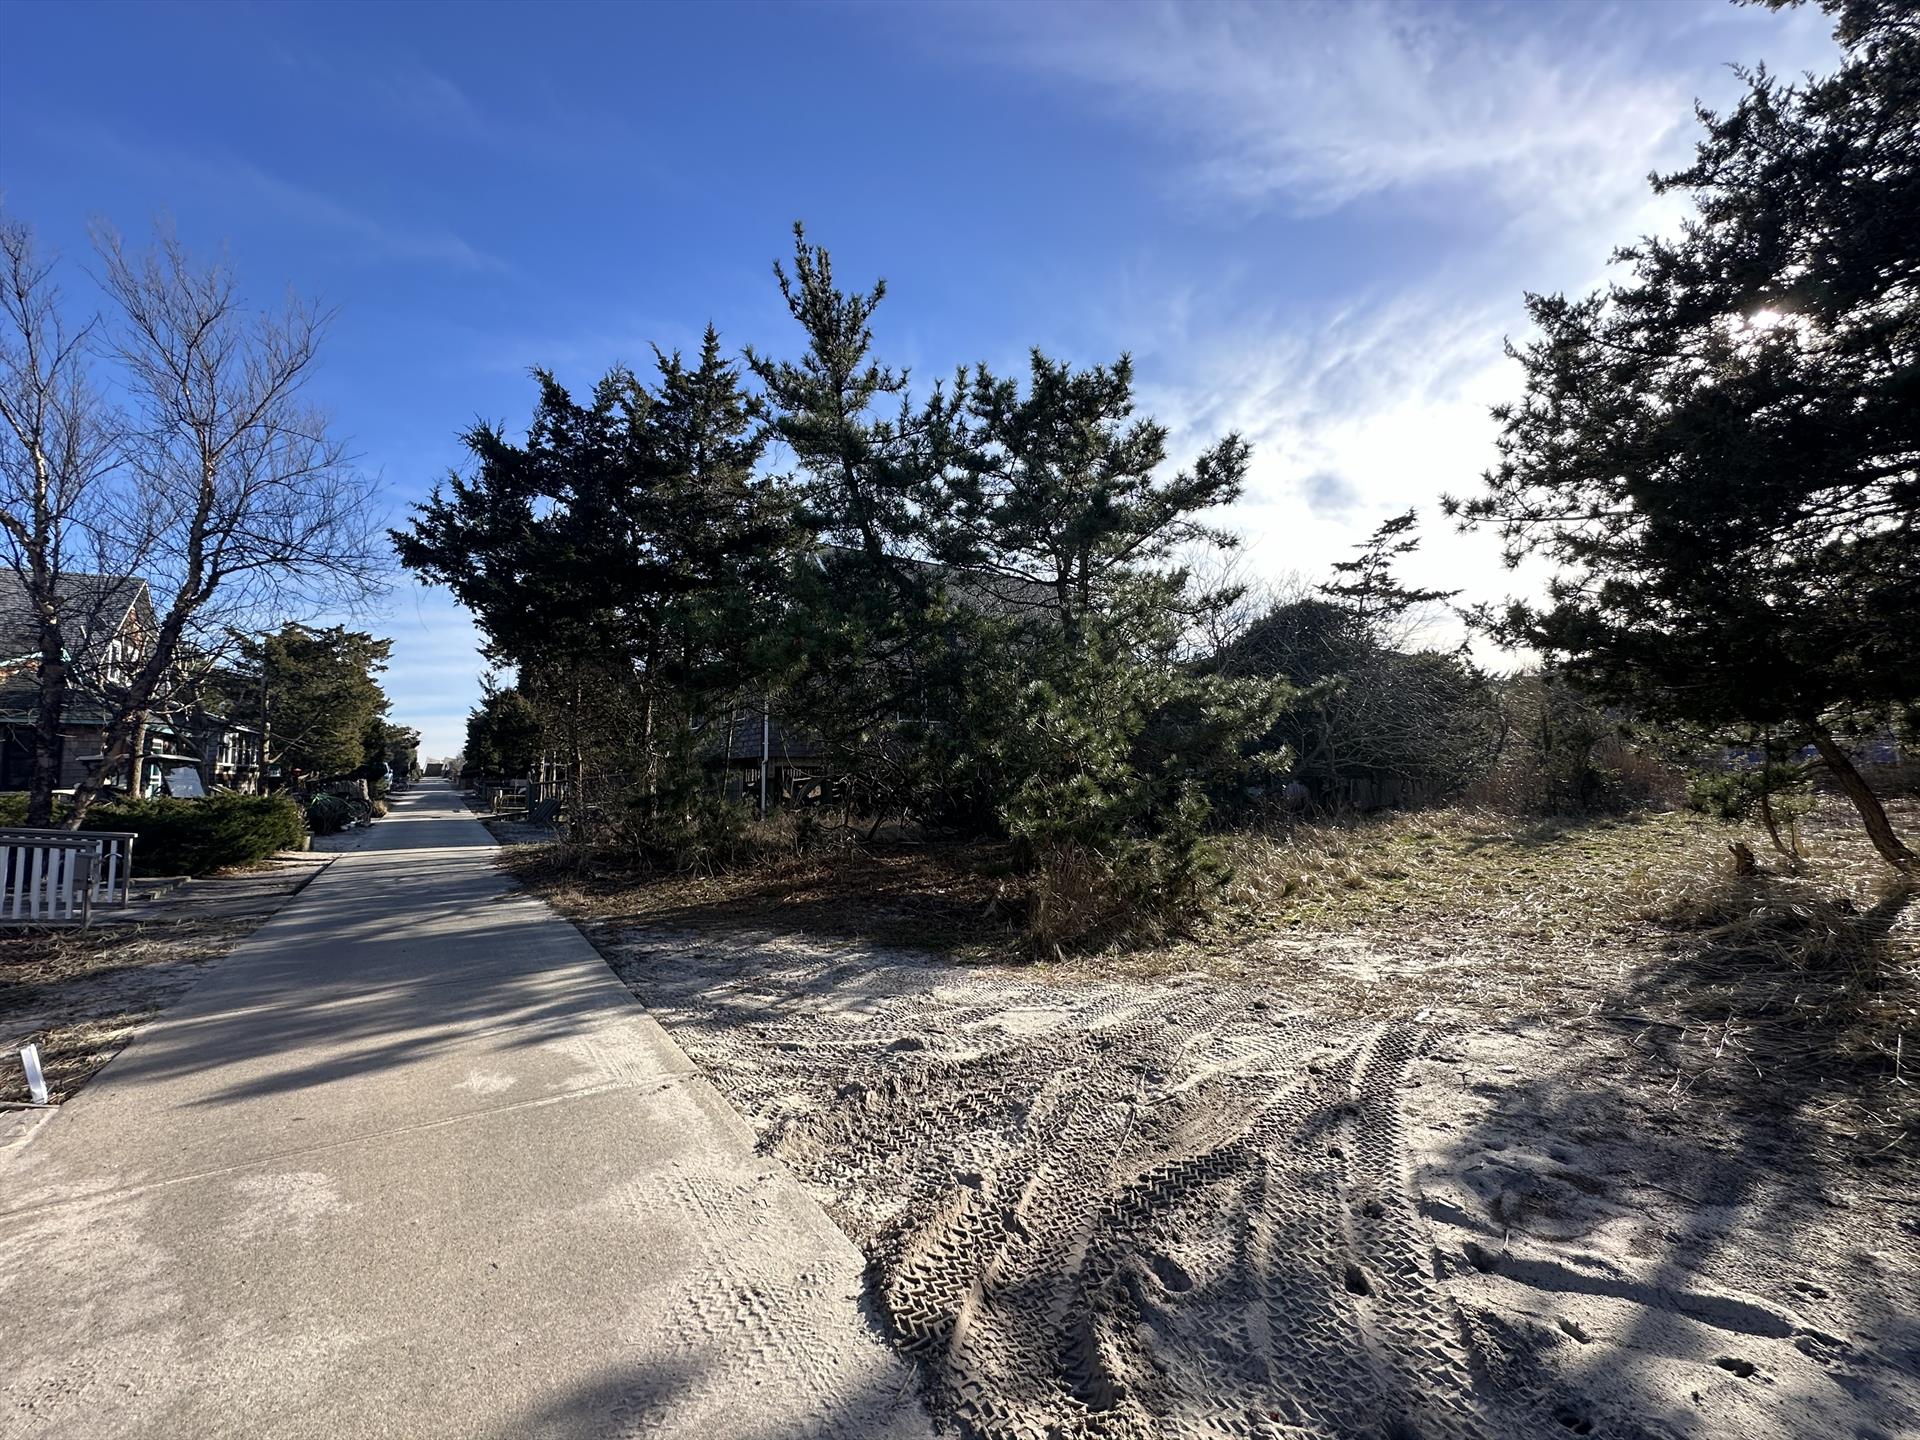 Rarely available parcel located on one of the most desirable streets in the Village of Ocean Beach. This 50 X 100 property is situated less than 500 ft. to the beach. Build the custom beach house you've always wanted here. 